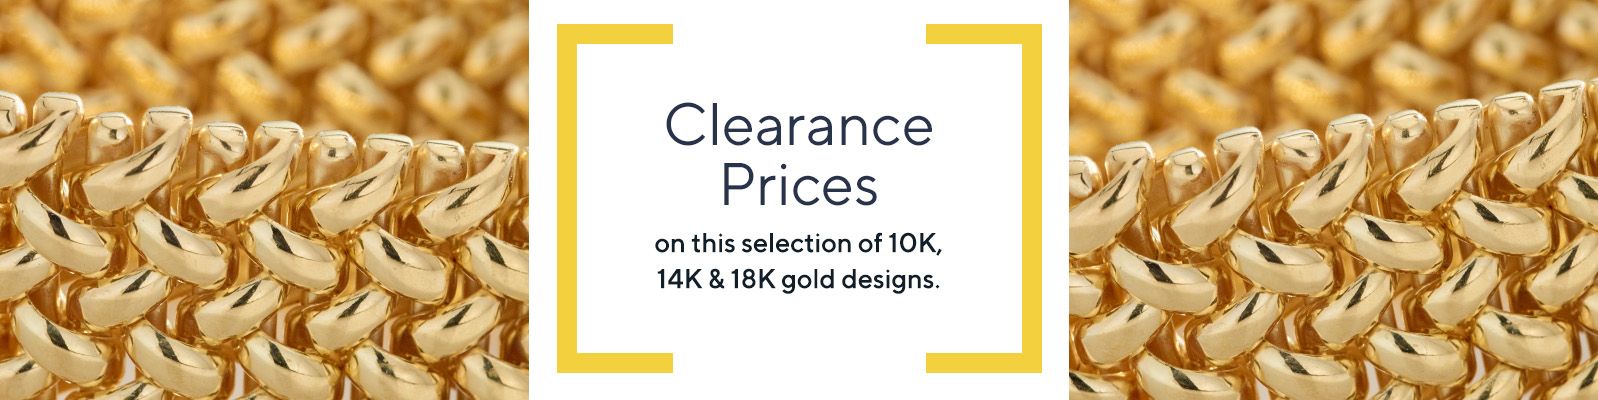 Clearance Prices on this selection of 10K, 14K & 18K gold designs.